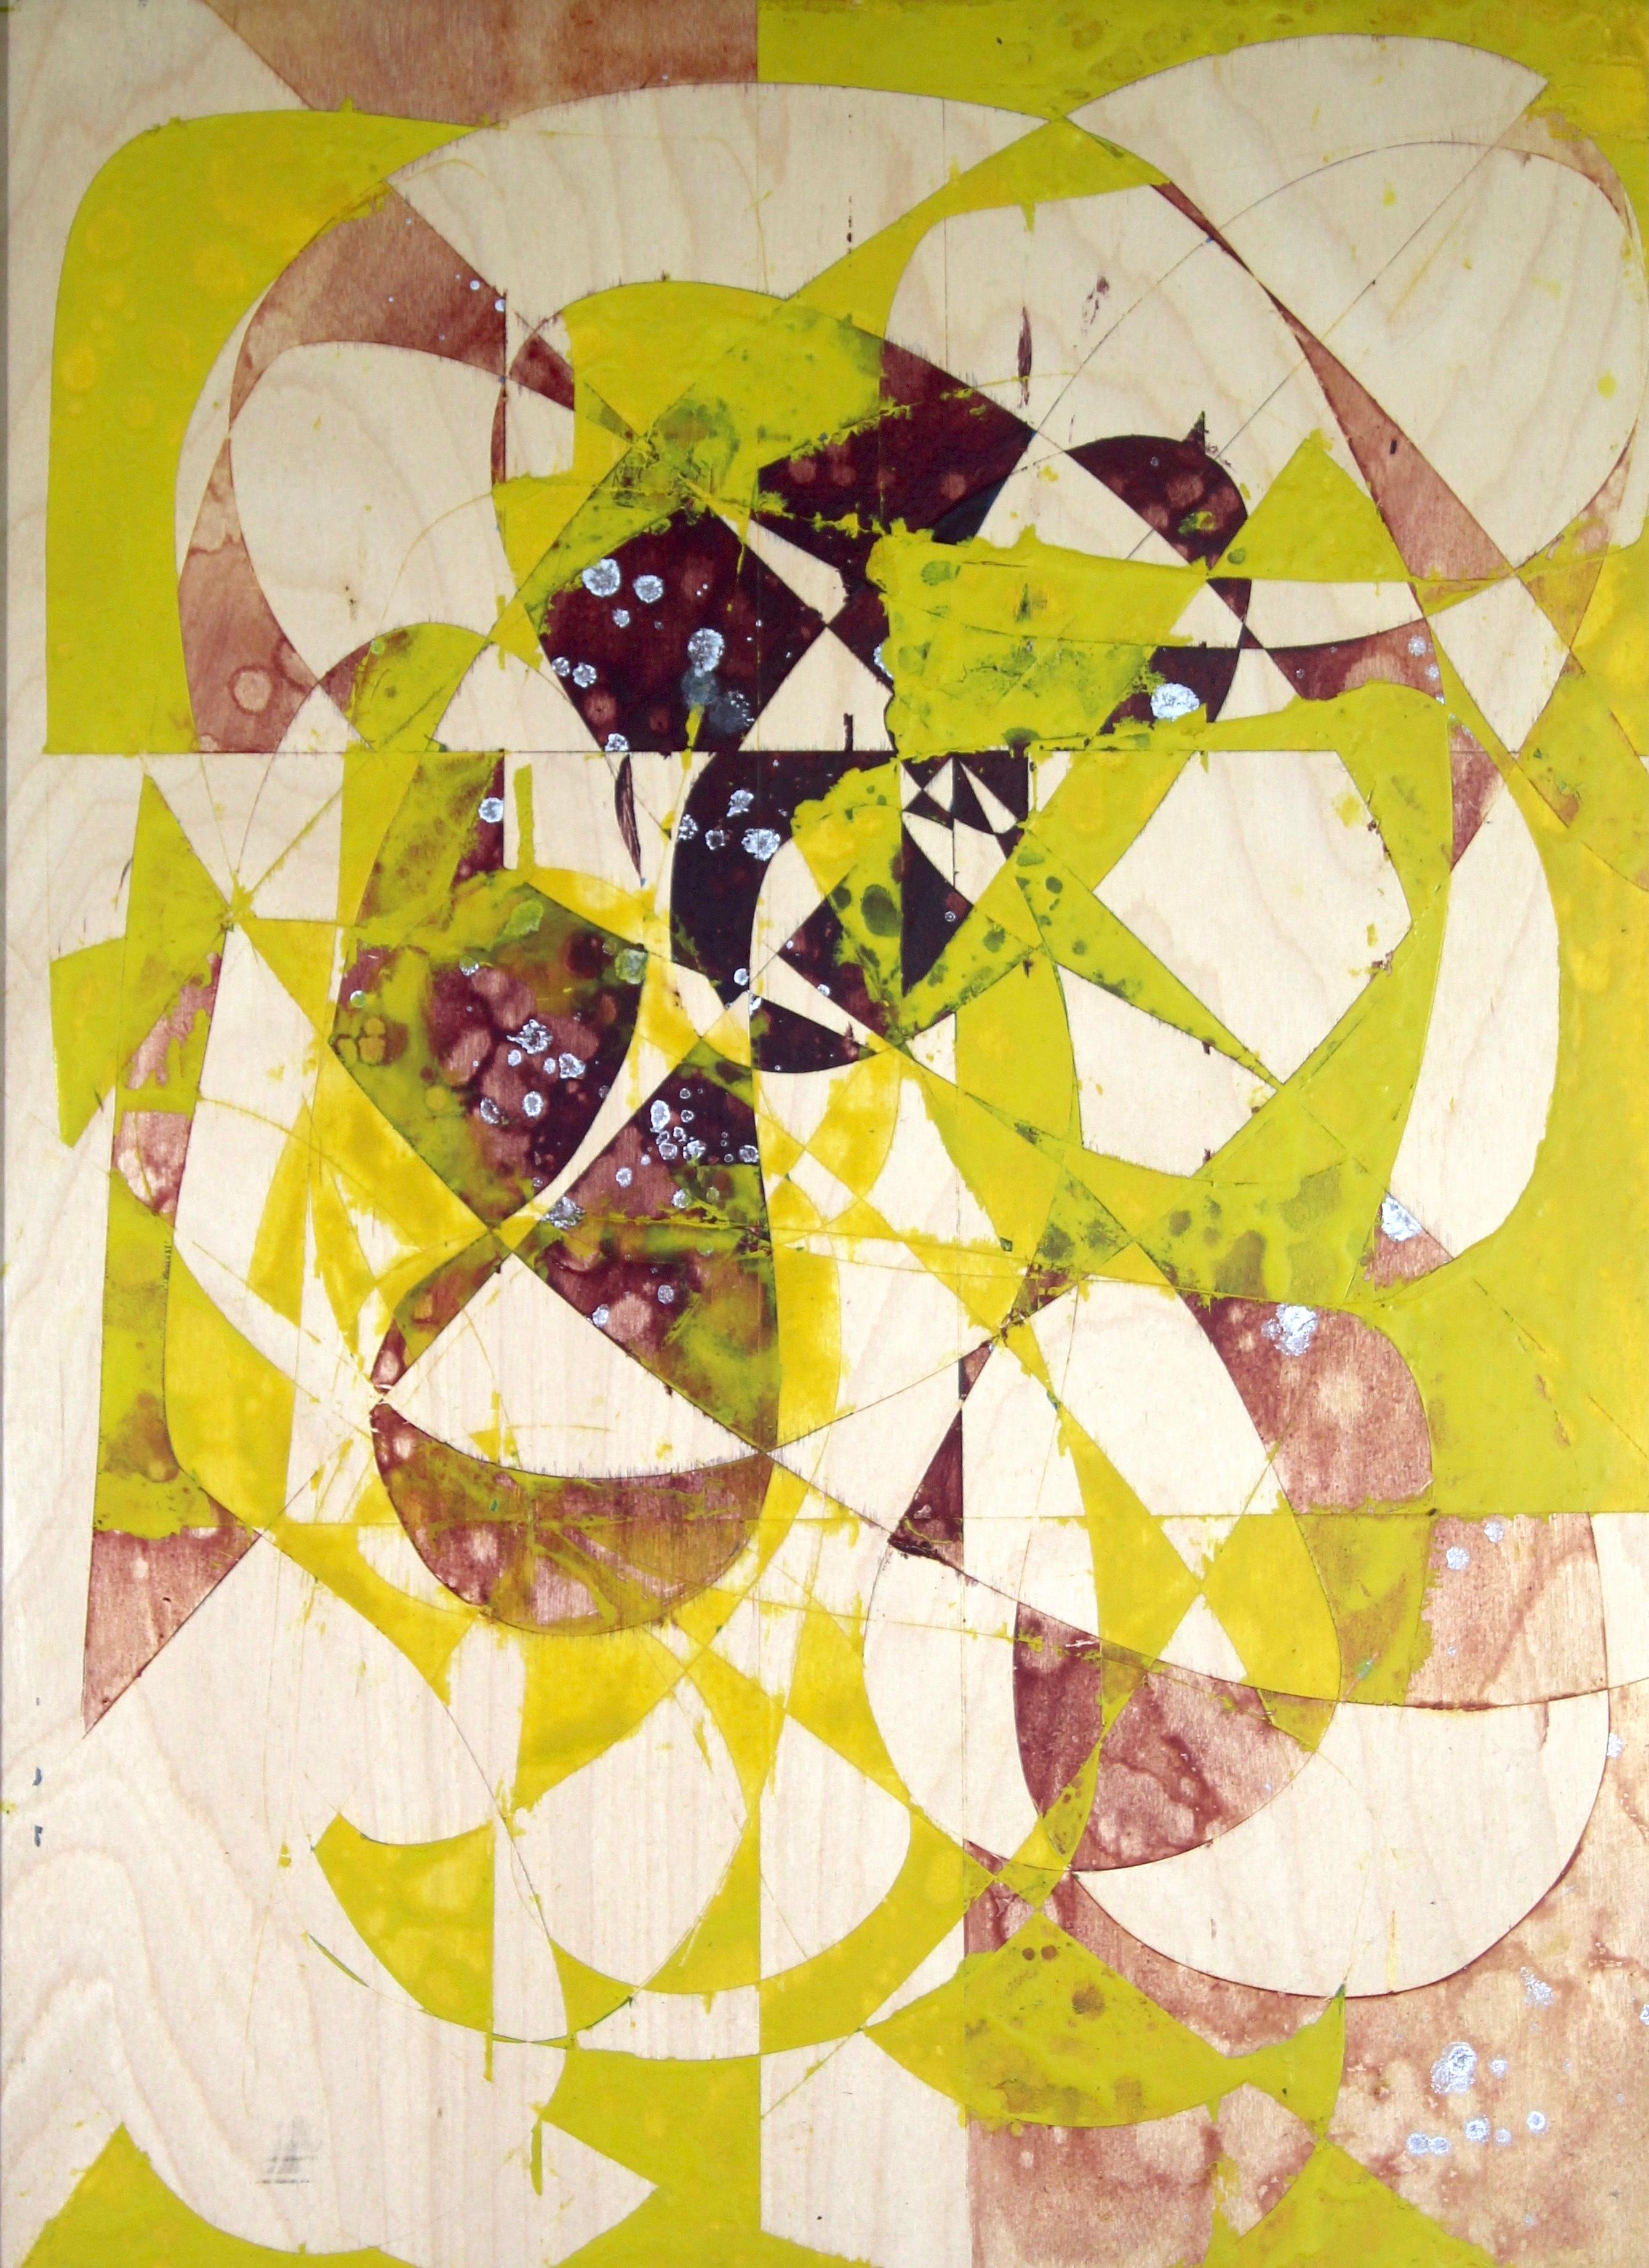 Jim Napierala Abstract Painting - Fate is the Wheel, green and white geometric abstract painting on wood panel